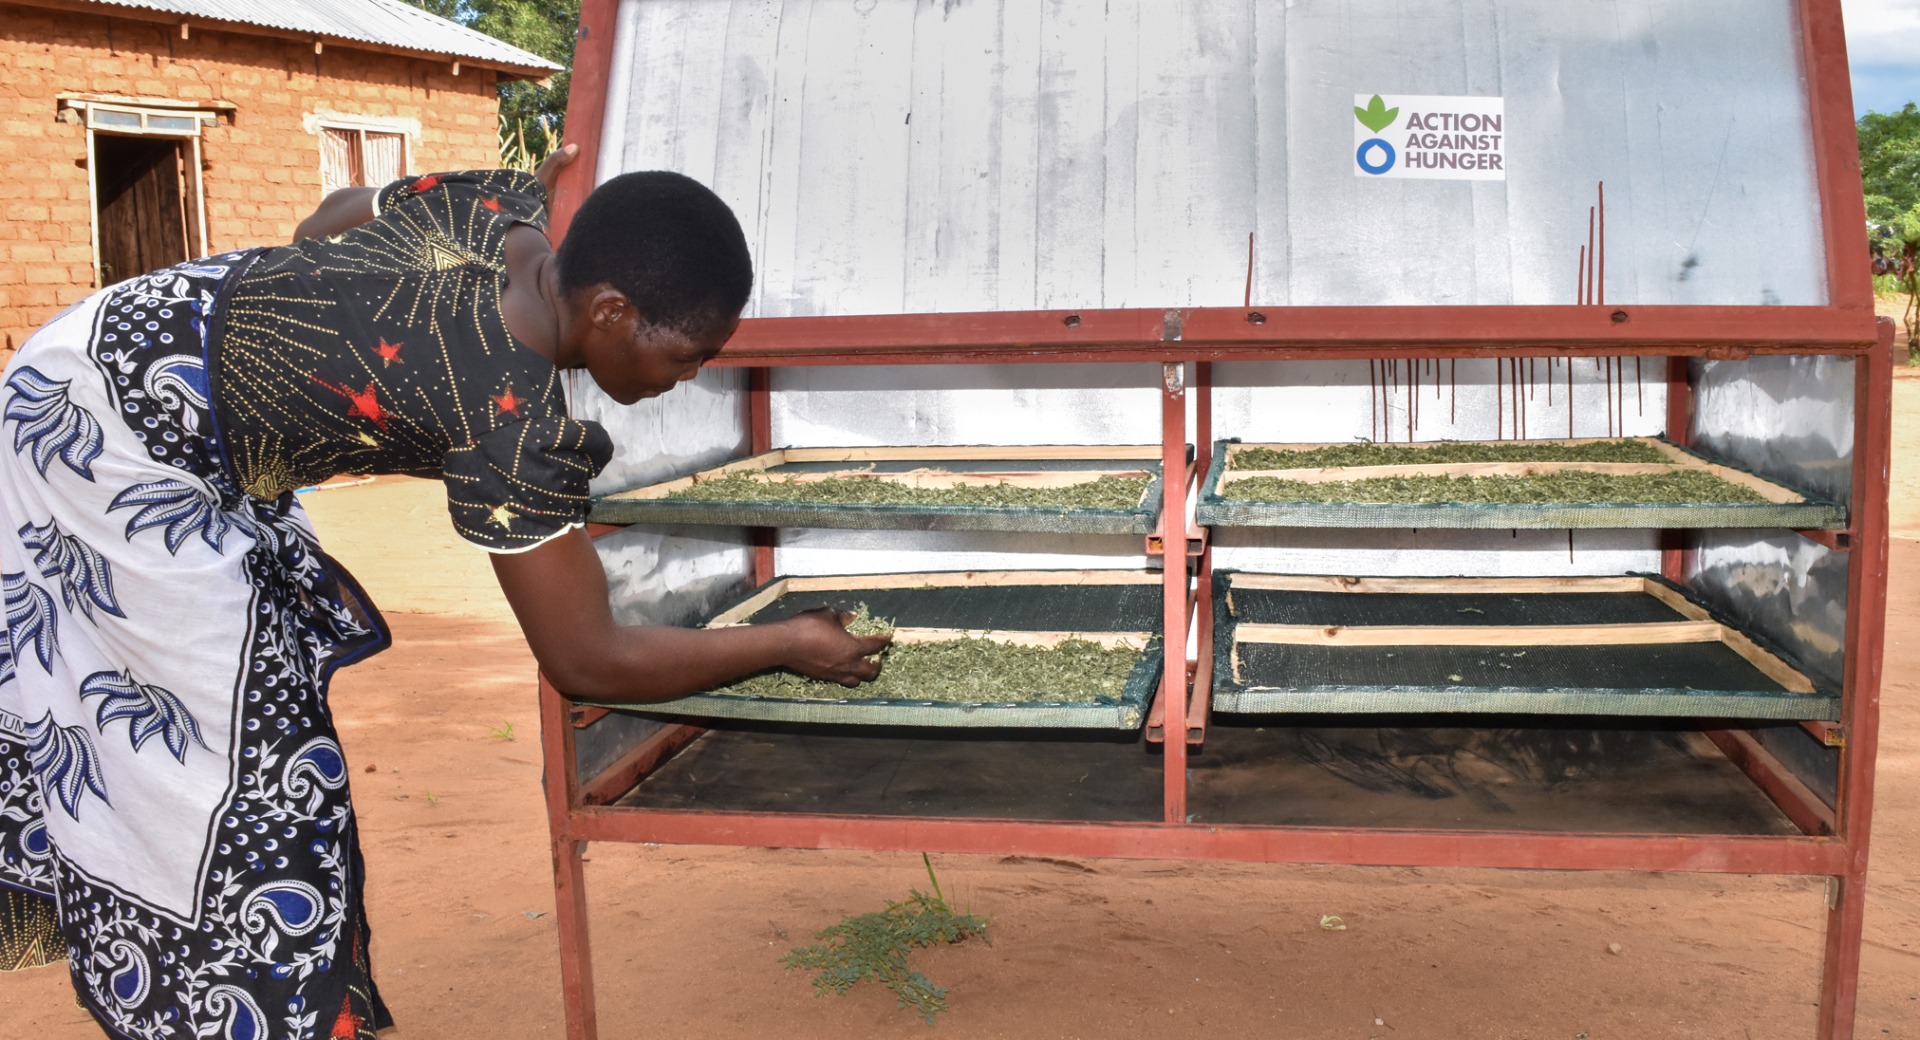 Anceran preserves her crops using solar driers.